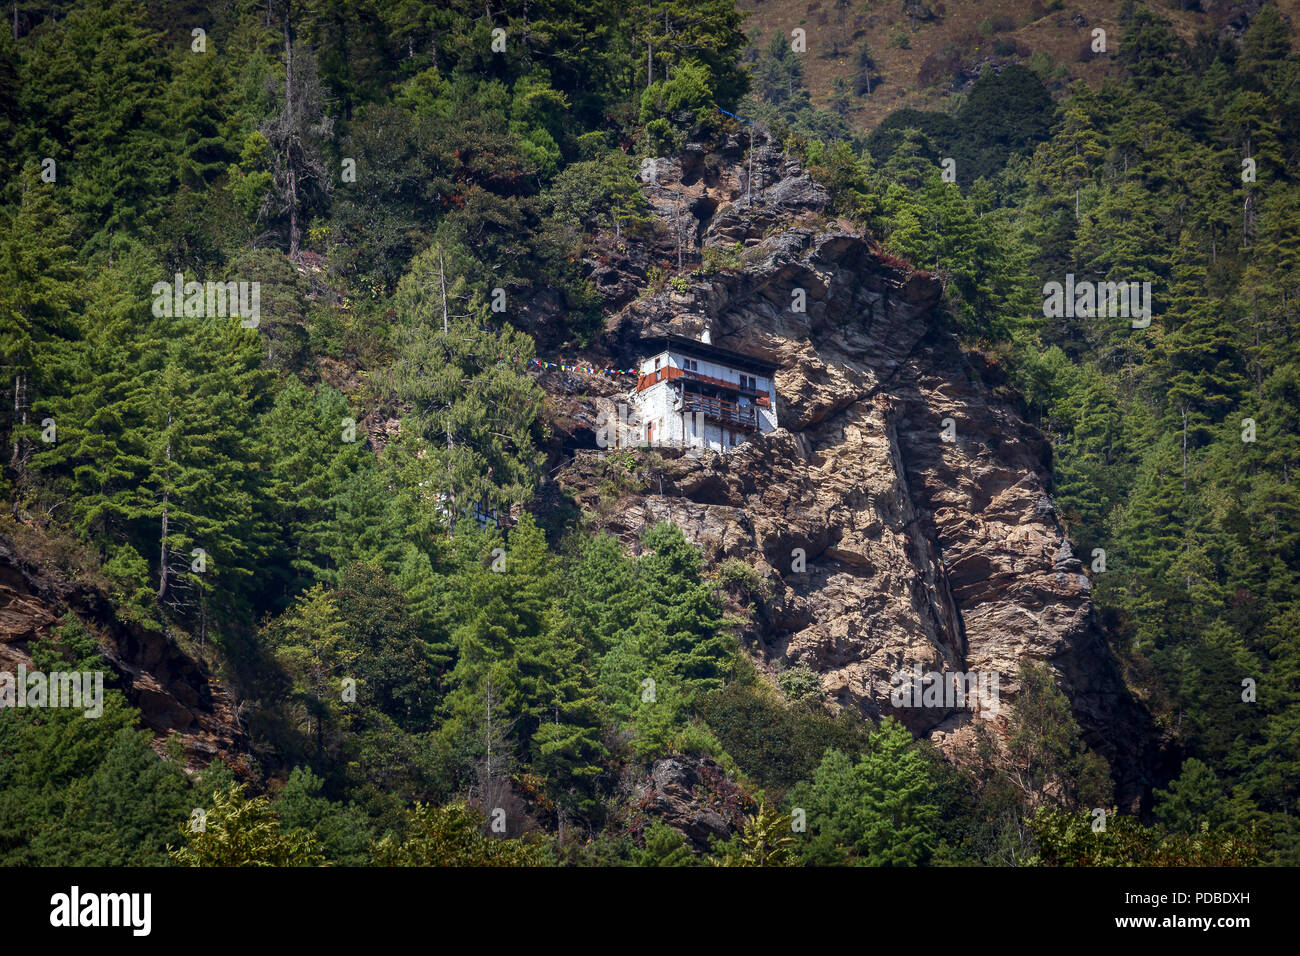 Bhutanese-style residential building surrounded by forest, Bhutan. Stock Photo